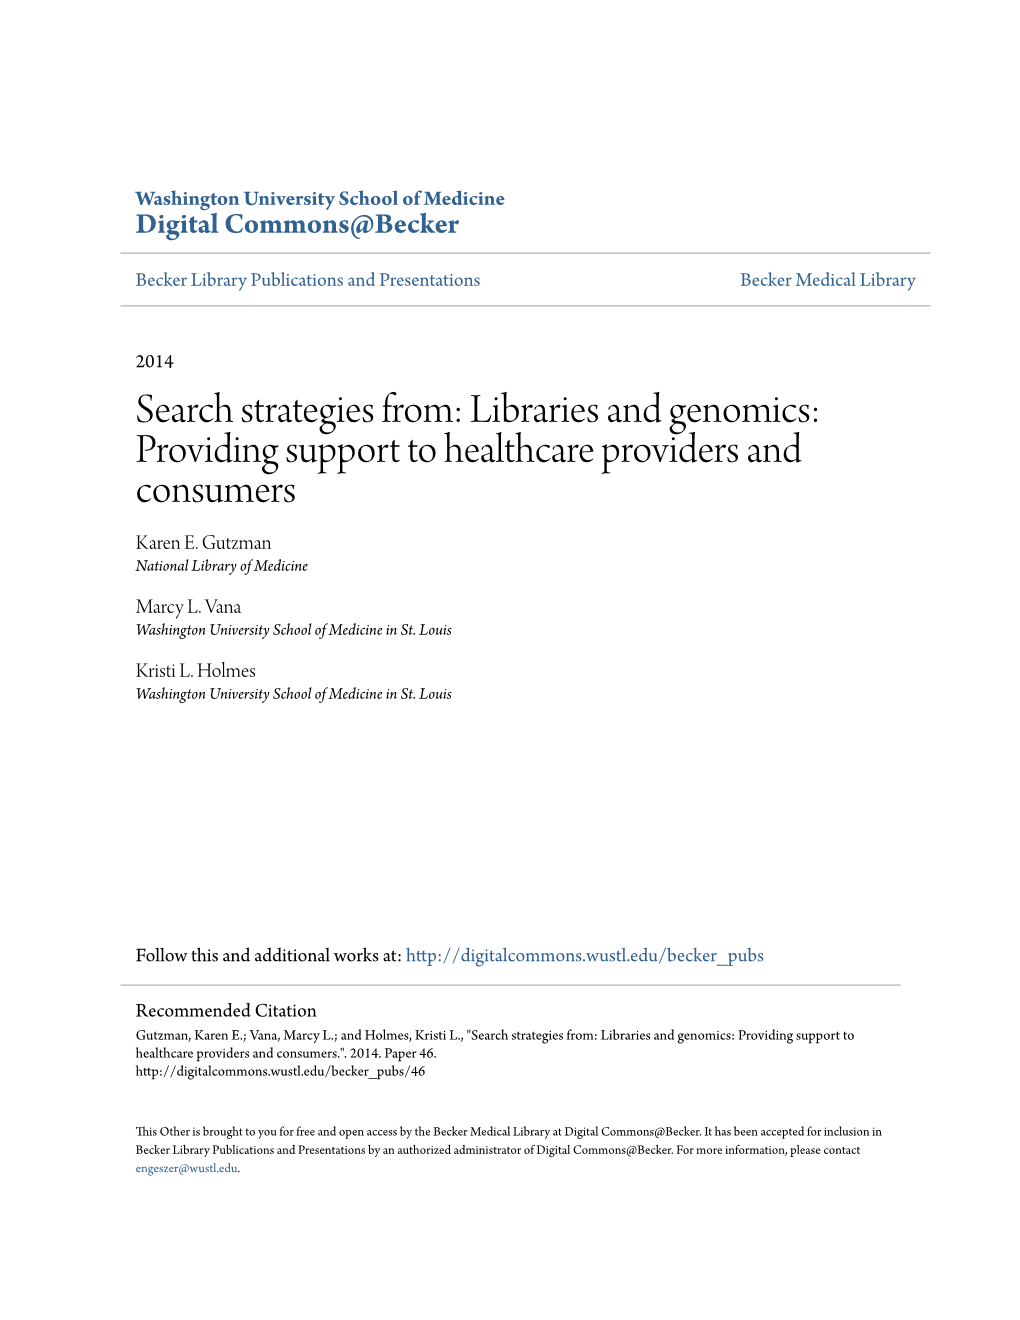 Libraries and Genomics: Providing Support to Healthcare Providers and Consumers Karen E